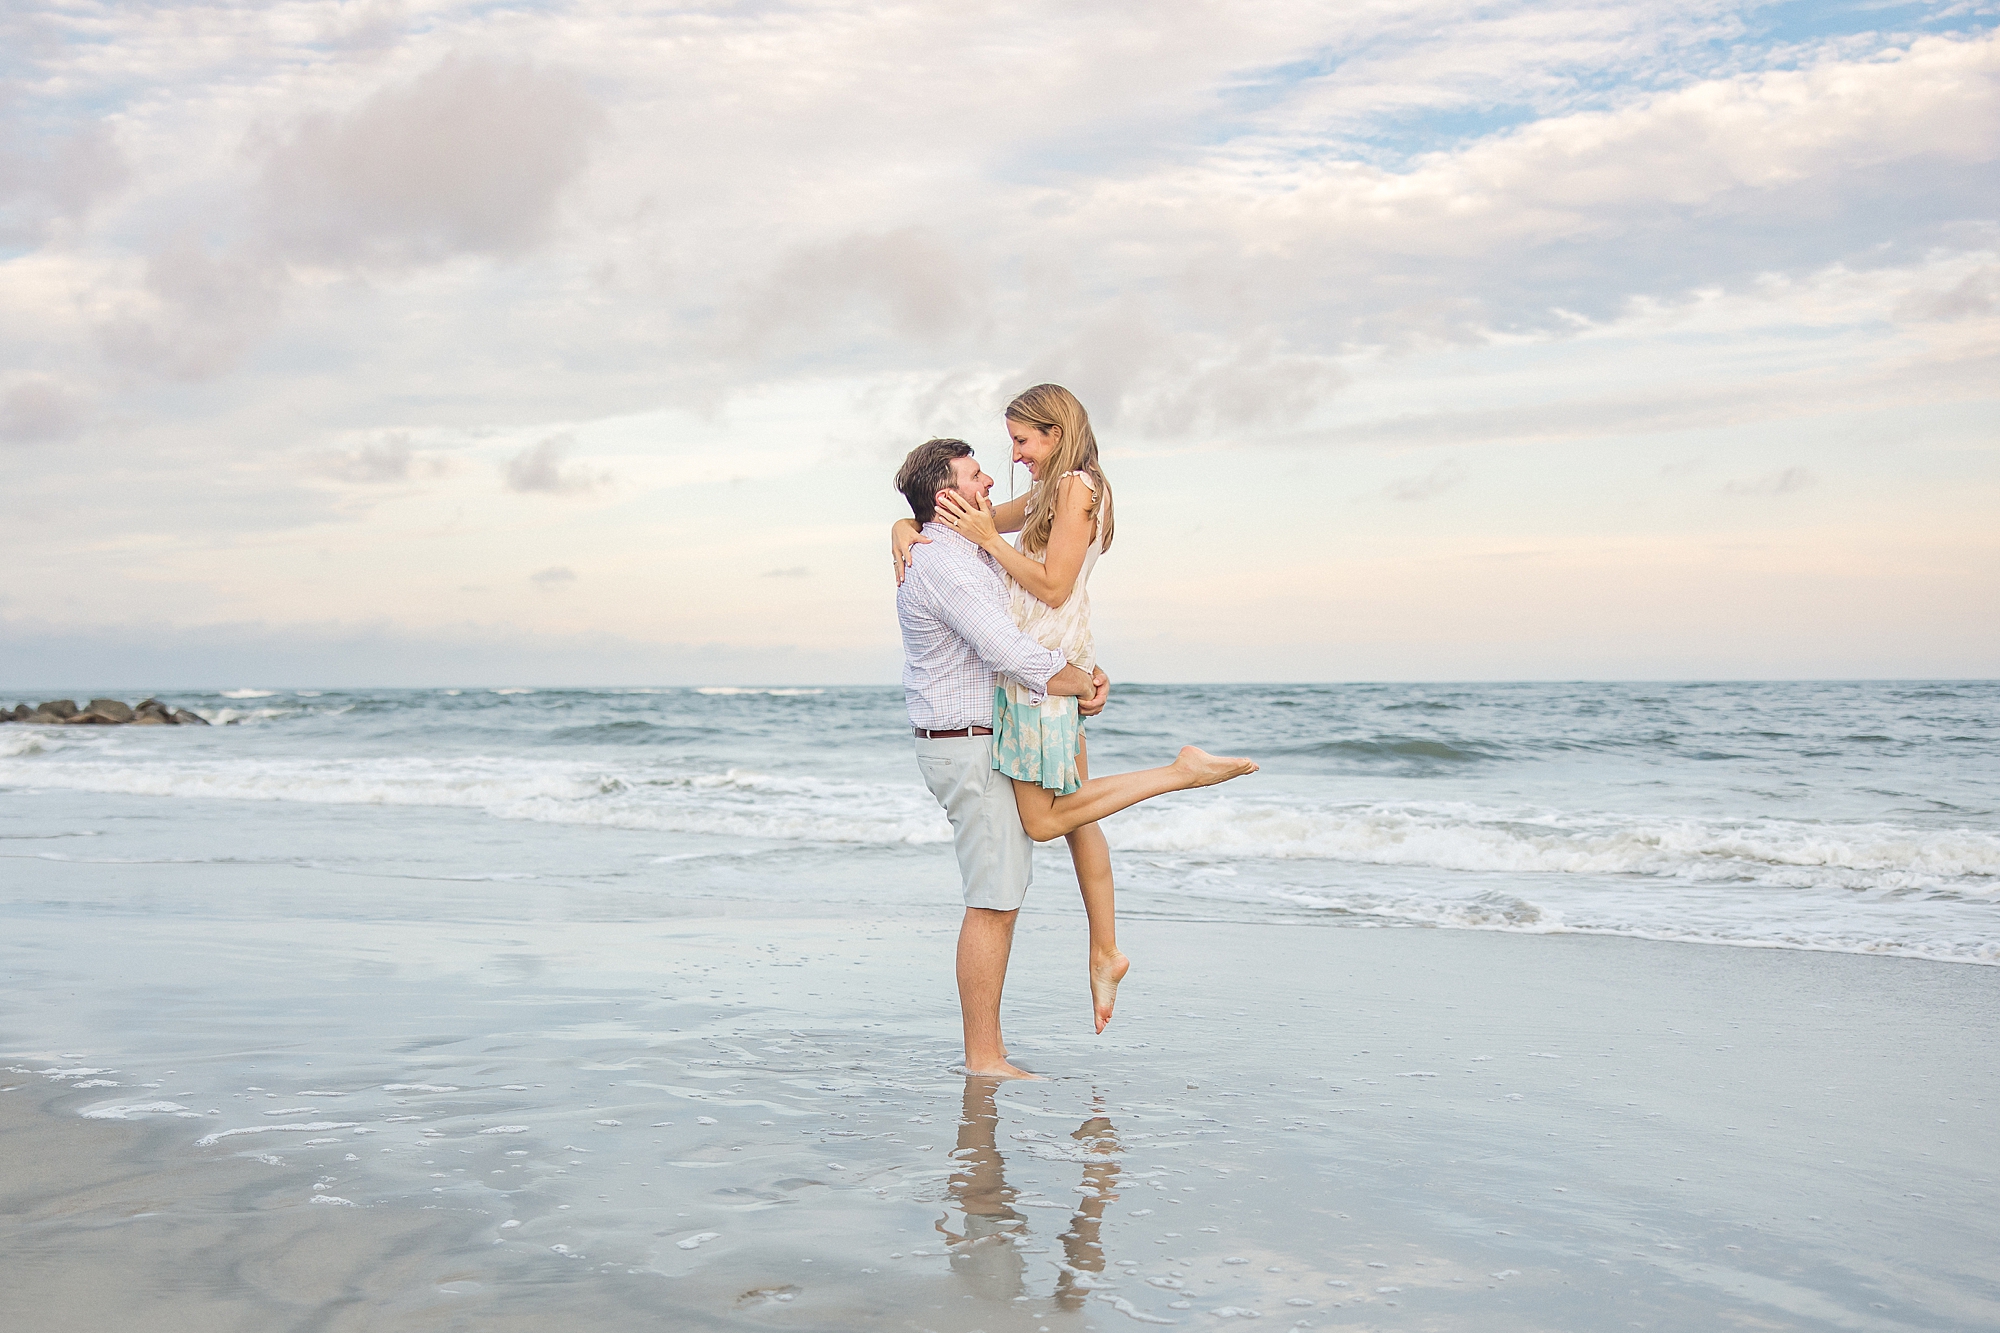 man lifts his fiance up on the beach